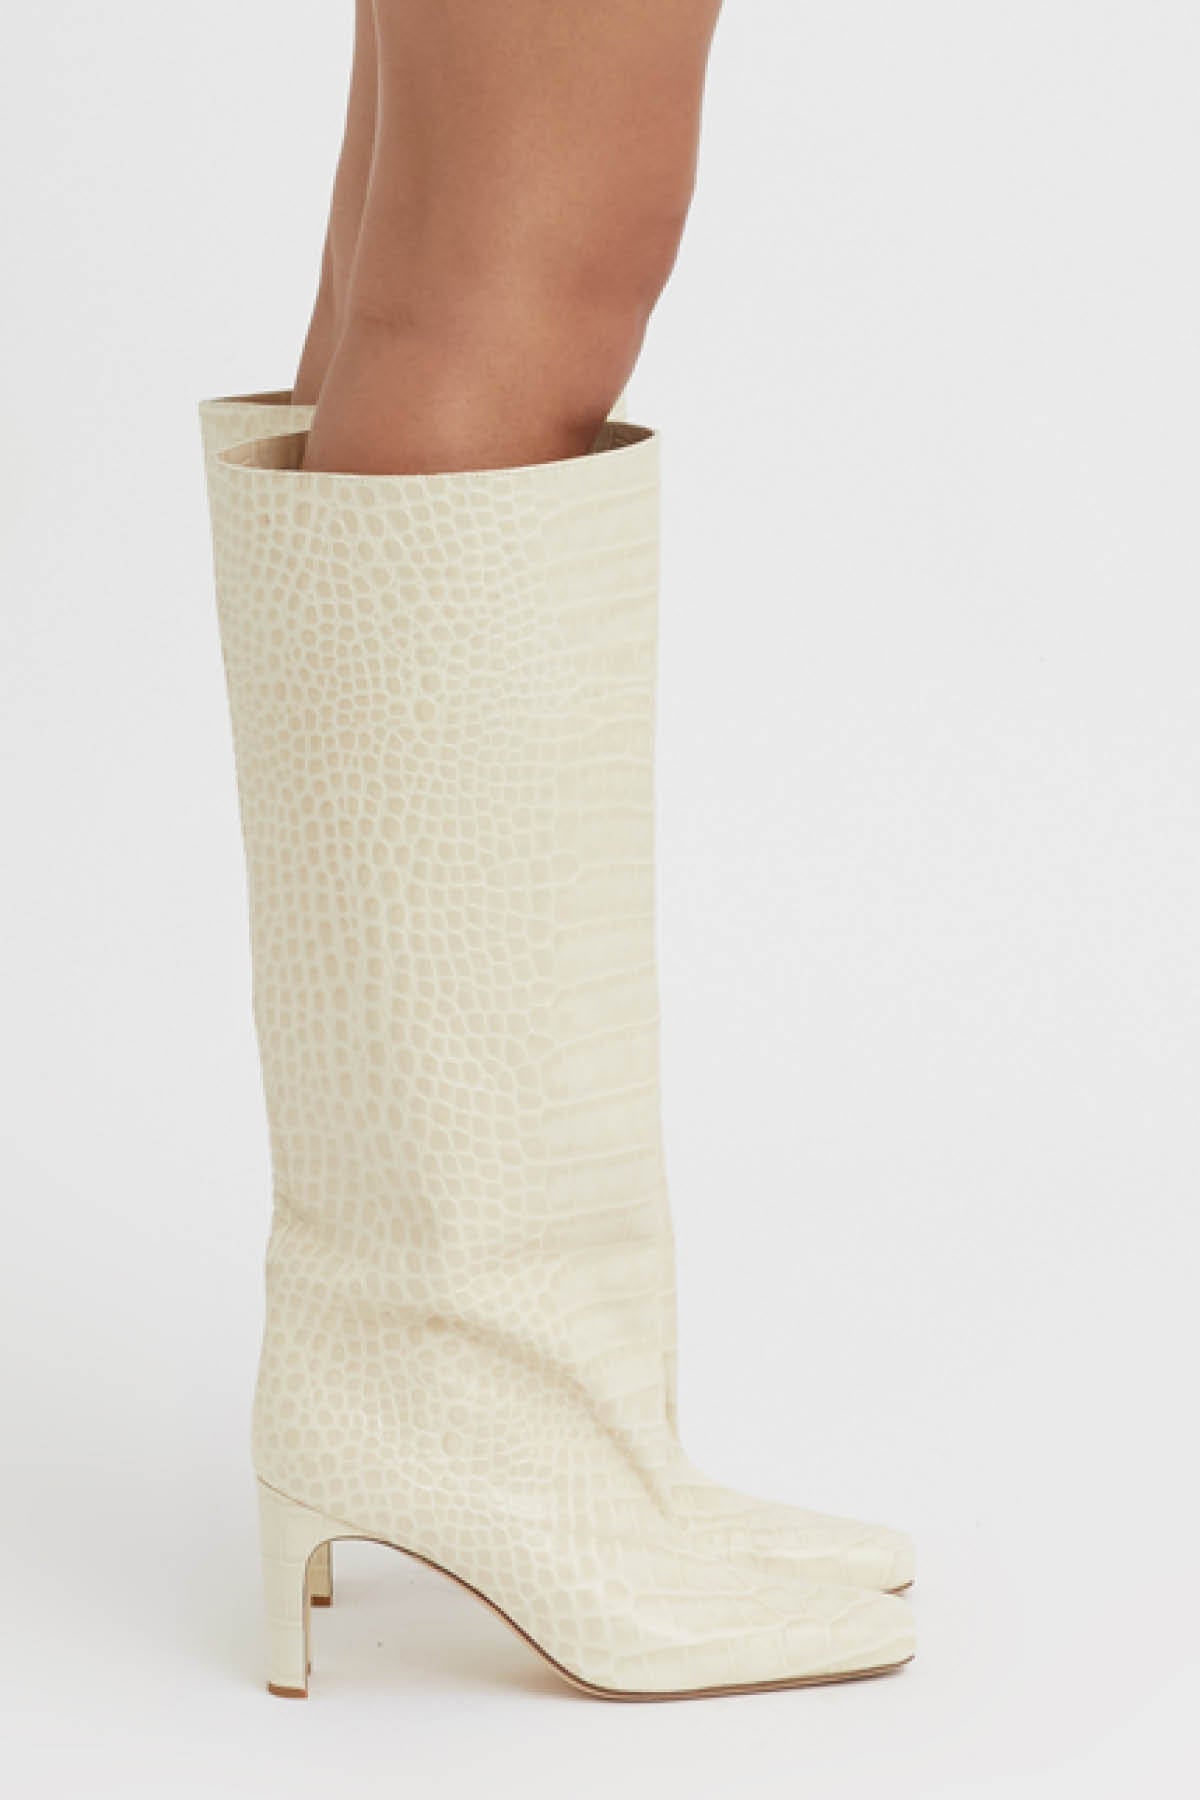 Camilla and Marc | Cosmos Knee High Boot - Ivory Croc